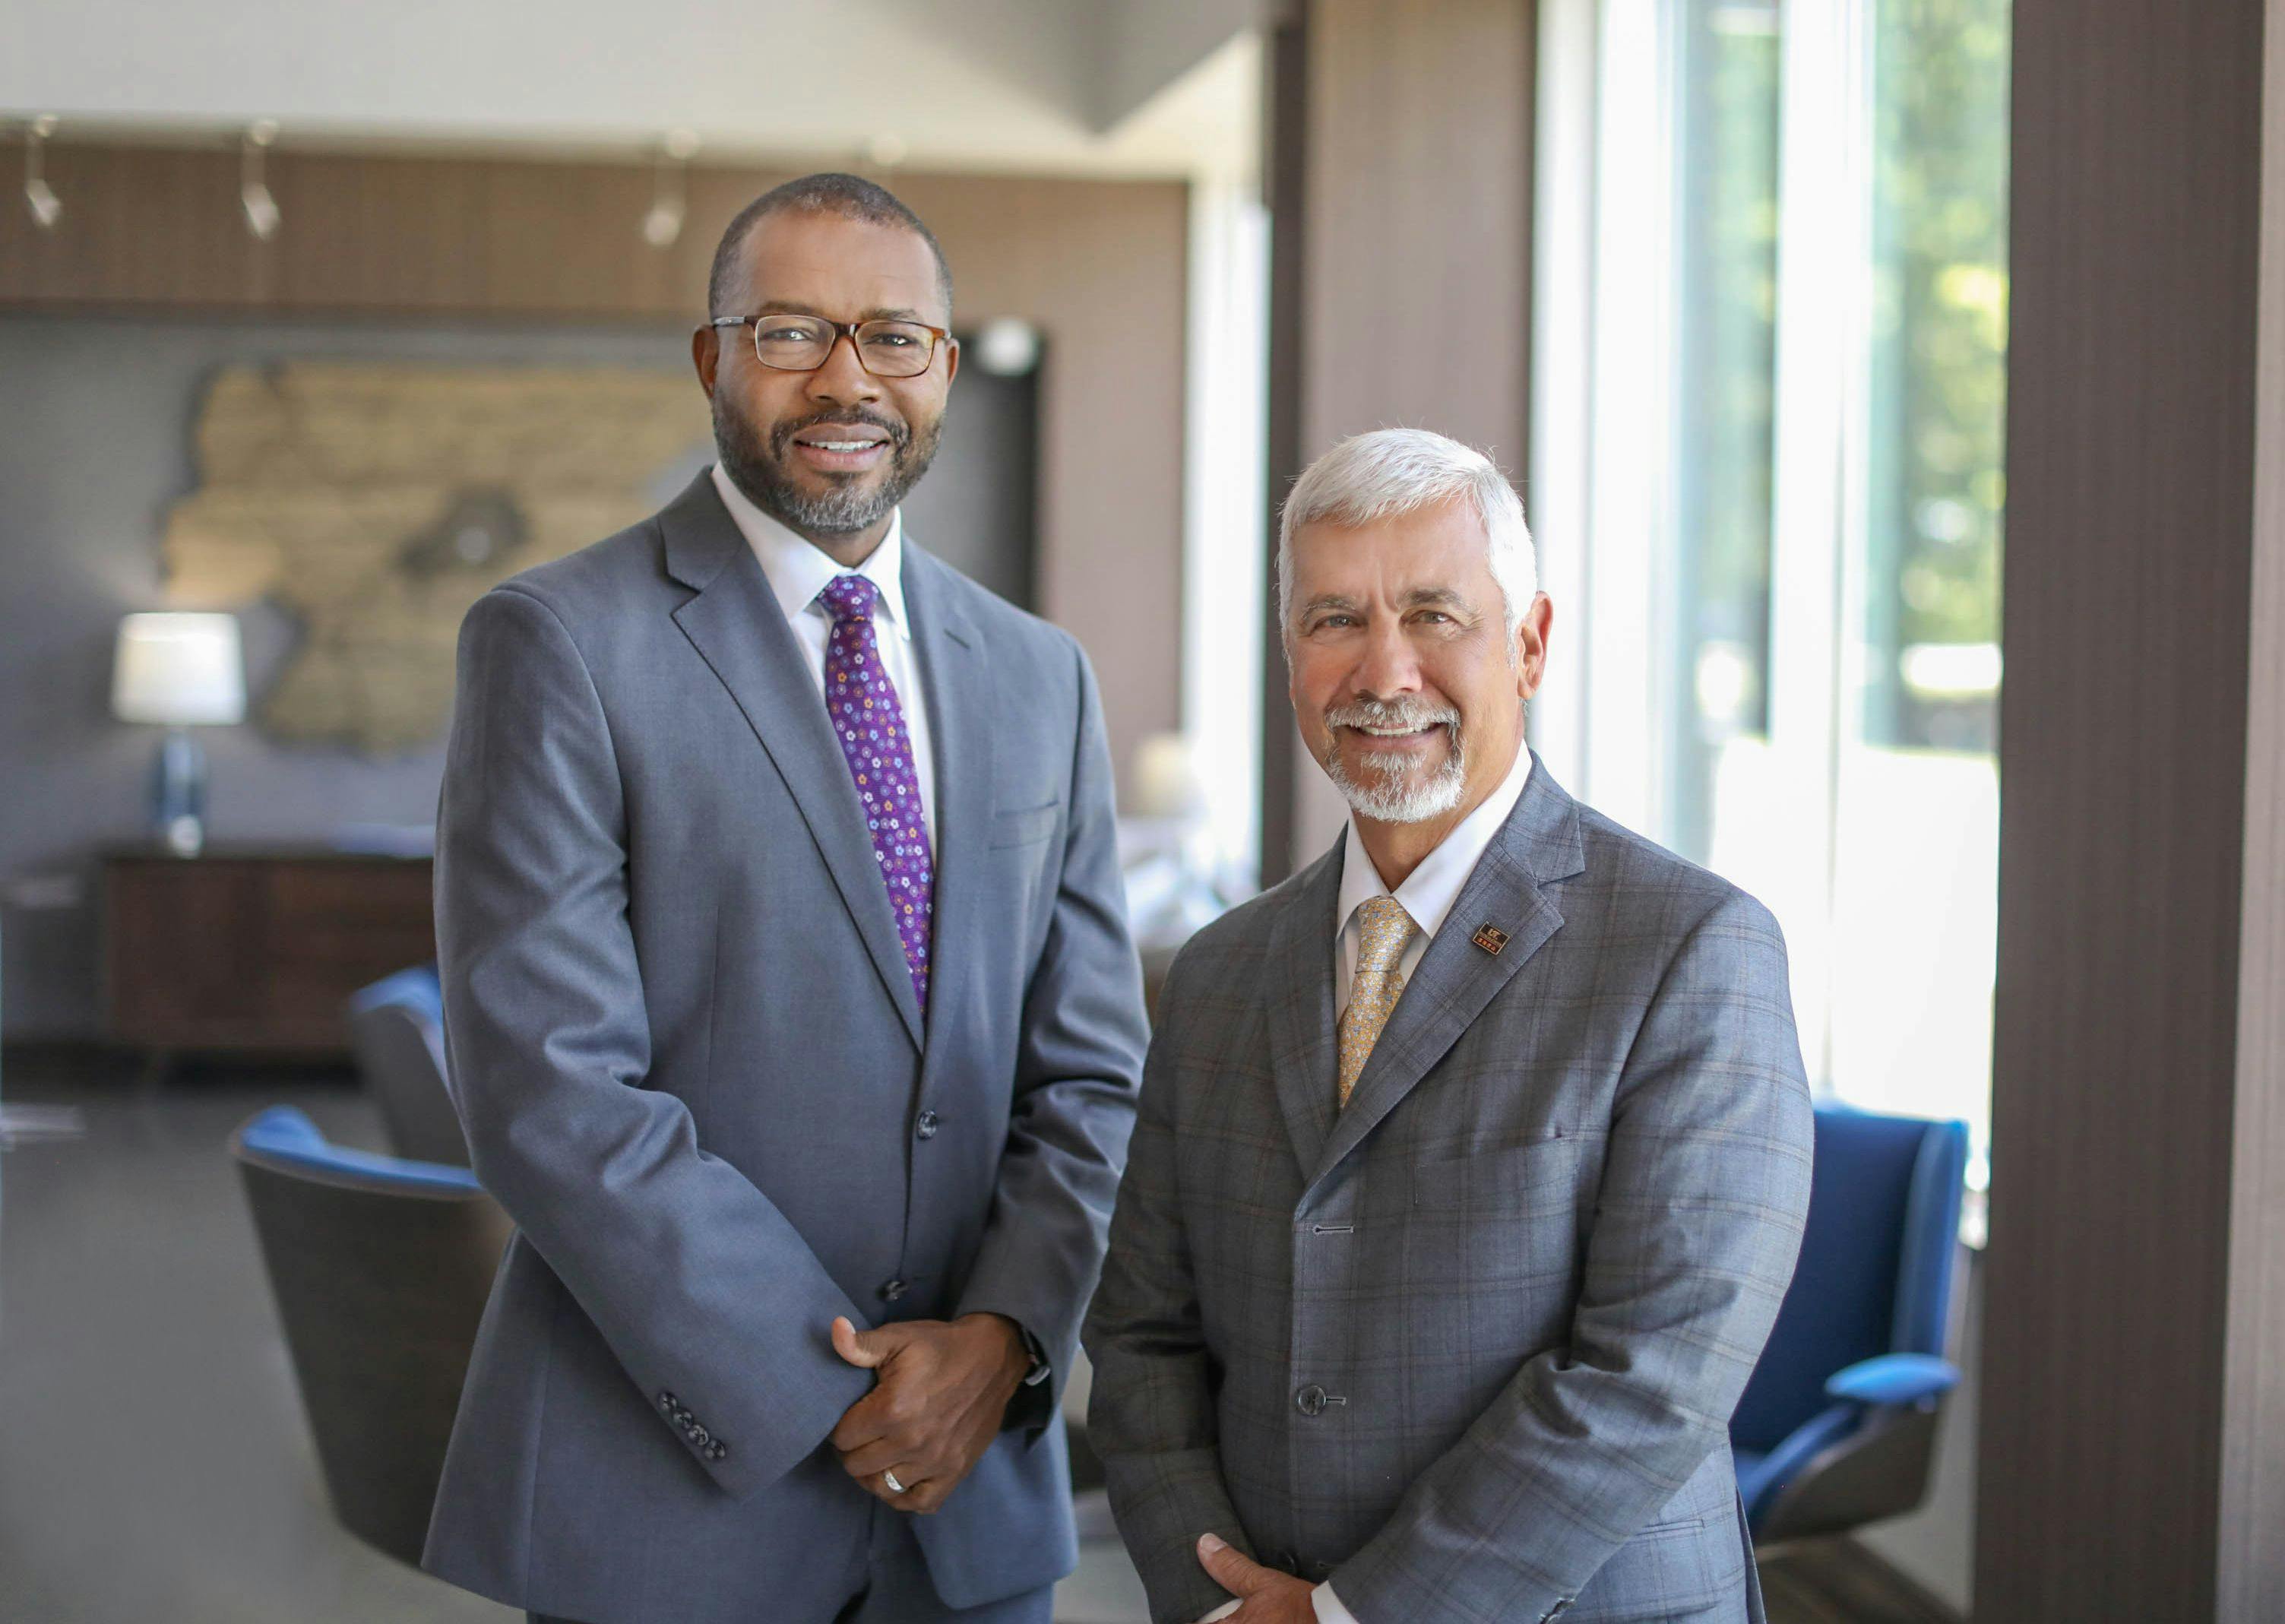 Keith Gray, left, the president of the University of Tennessee Medical Center, will take over as chief executive officer in April. Longtime CEO Joe Landsman plans to retire next spring but is working to ensure a smooth transition. (Photo: UTMC)